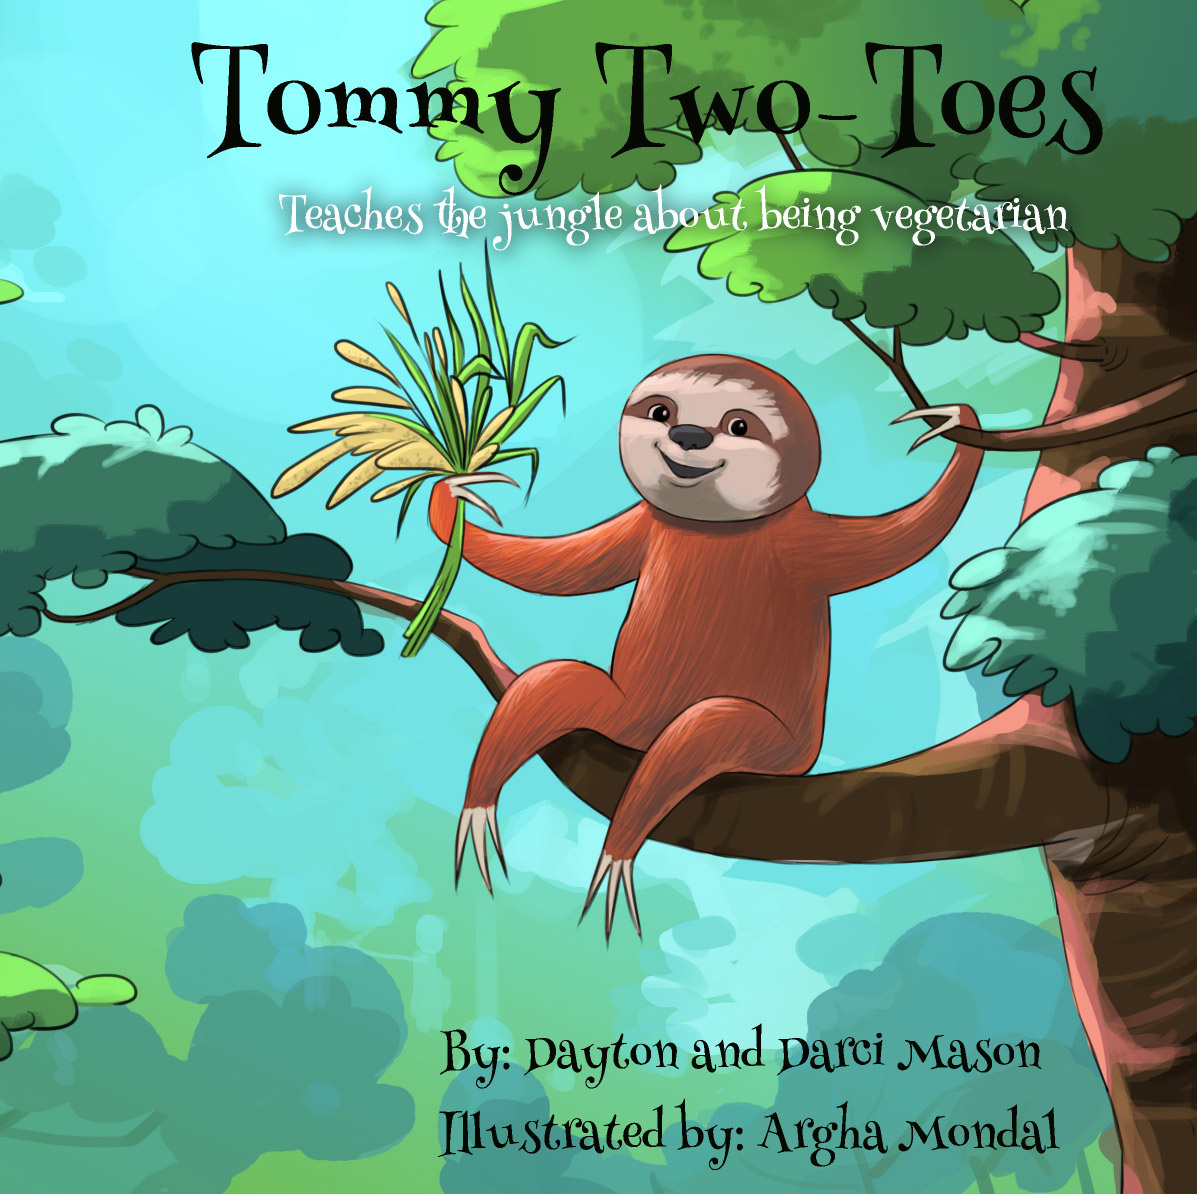 Tommy Two-Toes